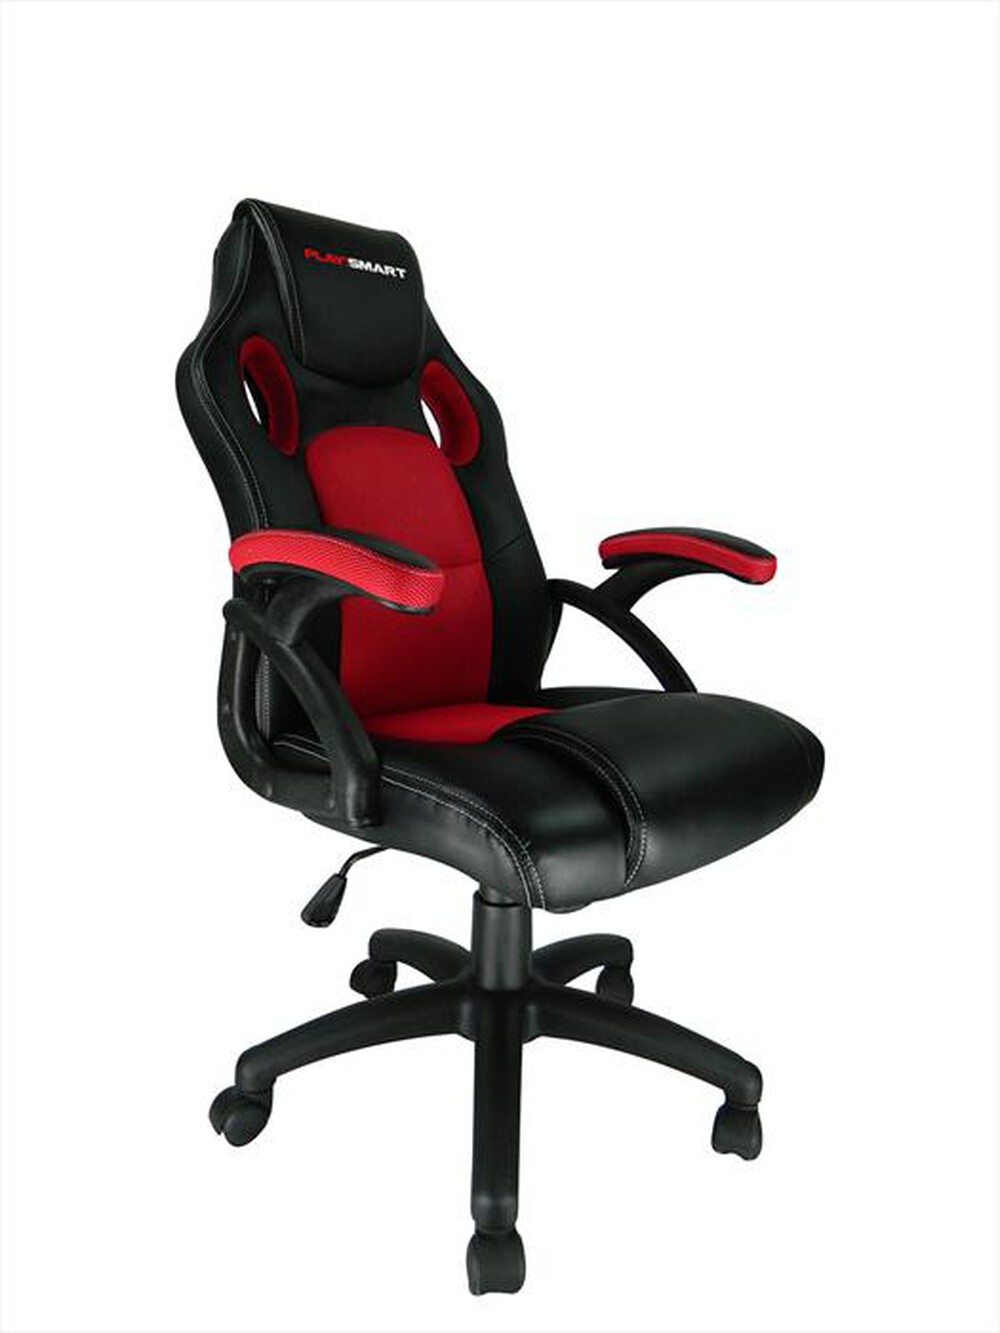 "GO!SMART - PLAYSMART SUPERIOR PC GAMING CHAIR RED-Red"